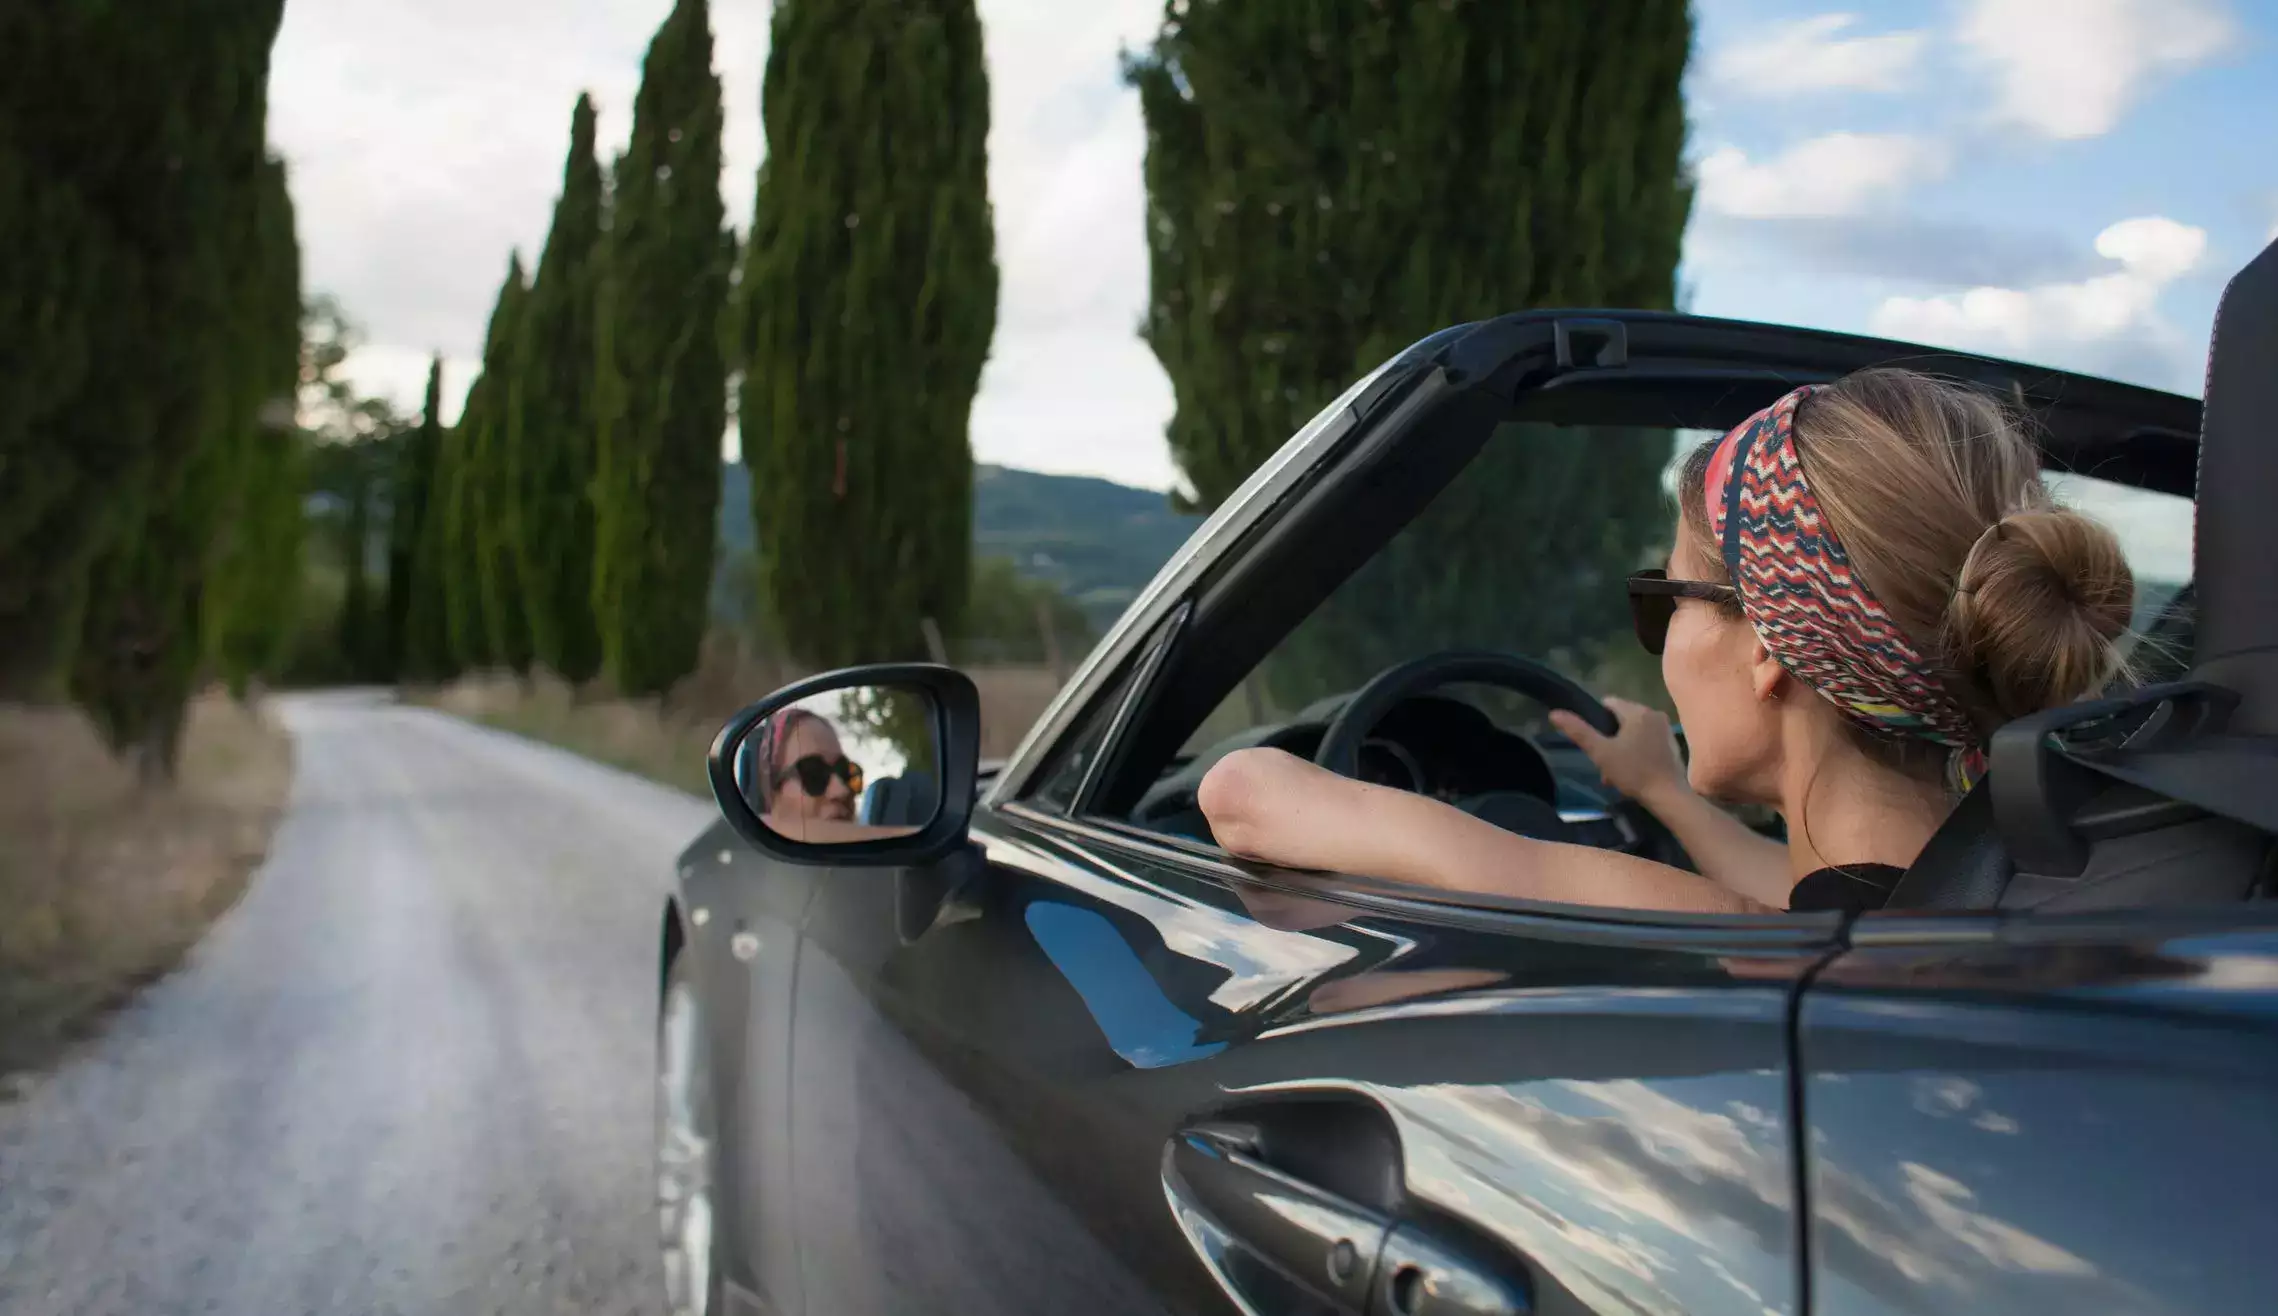 New French Road Safety Campaign Urges Drivers to Adopt 'Feminine' Driving Style